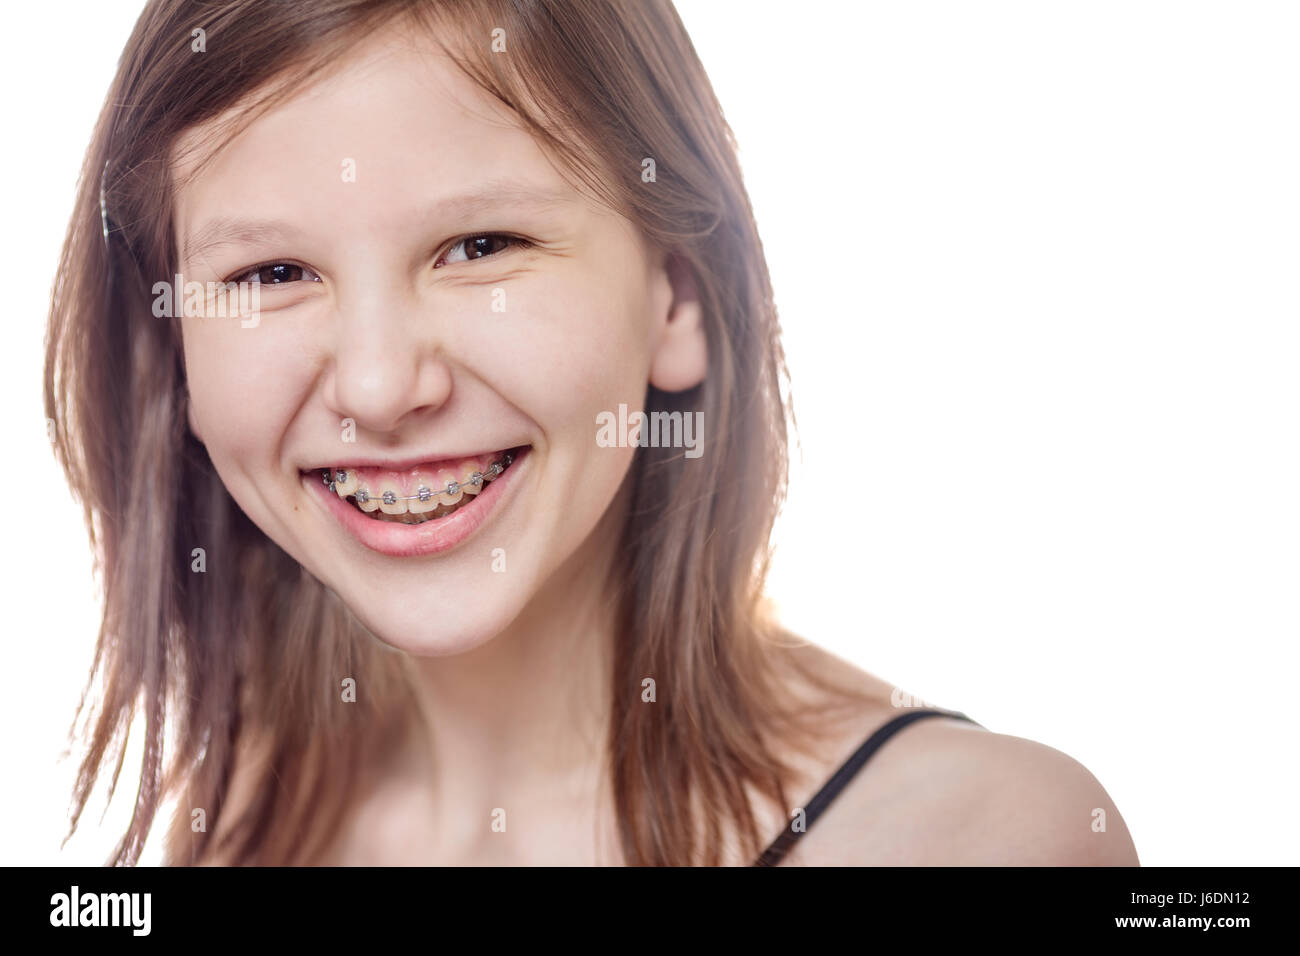 Laughing teen girl wearing braces looking at camera isolated on white Stock  Photo - Alamy